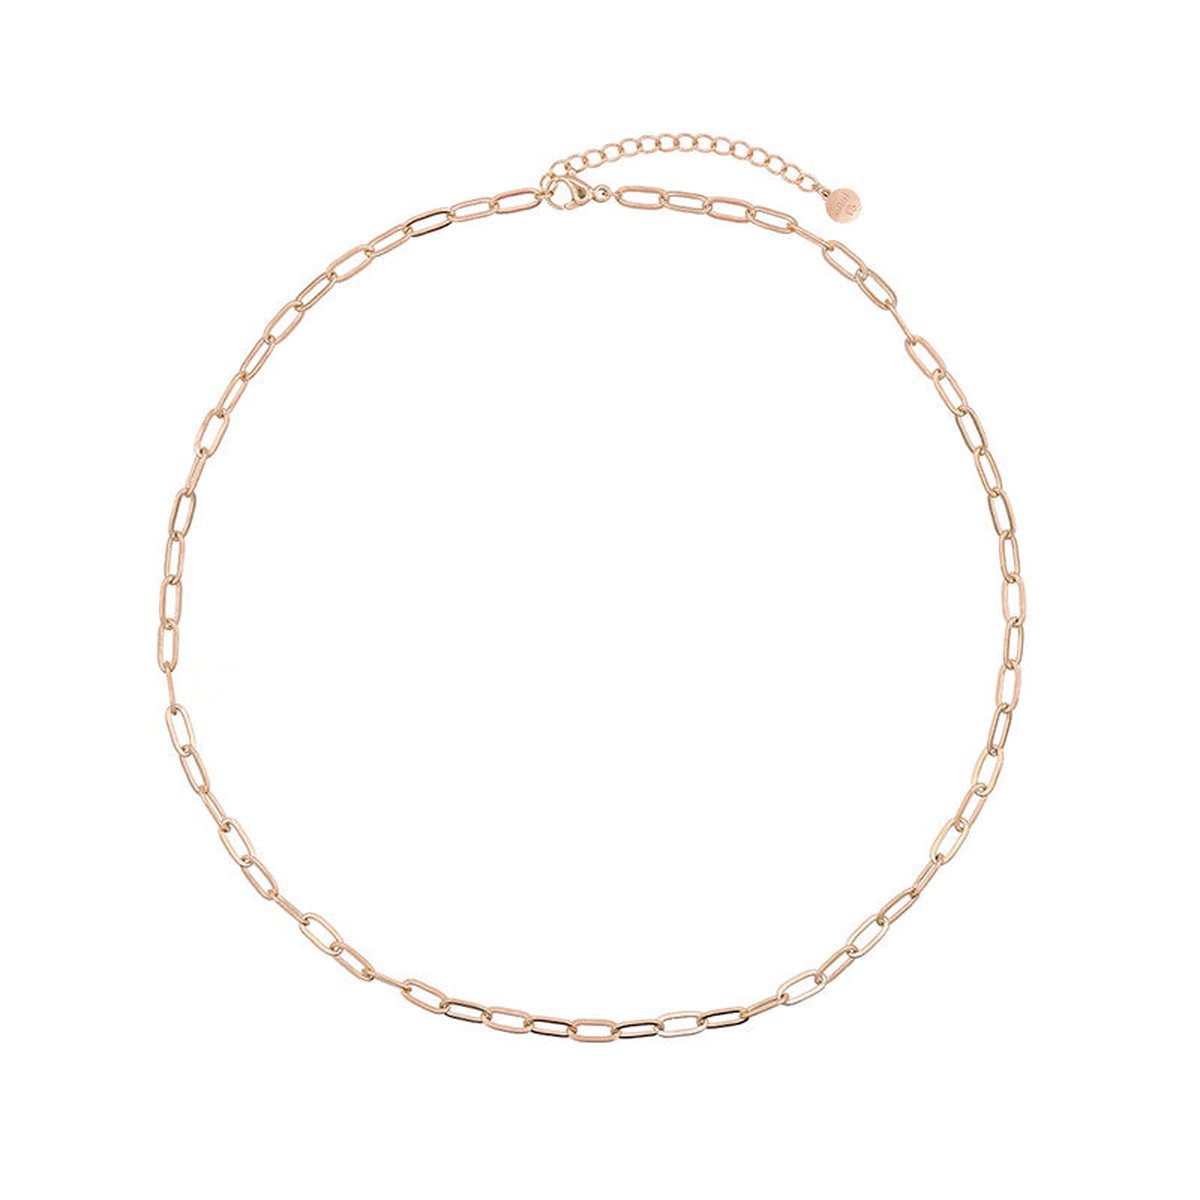 Mint15 Ketting 'Chain Necklace' - Roségoud RVS/Stainless Steel